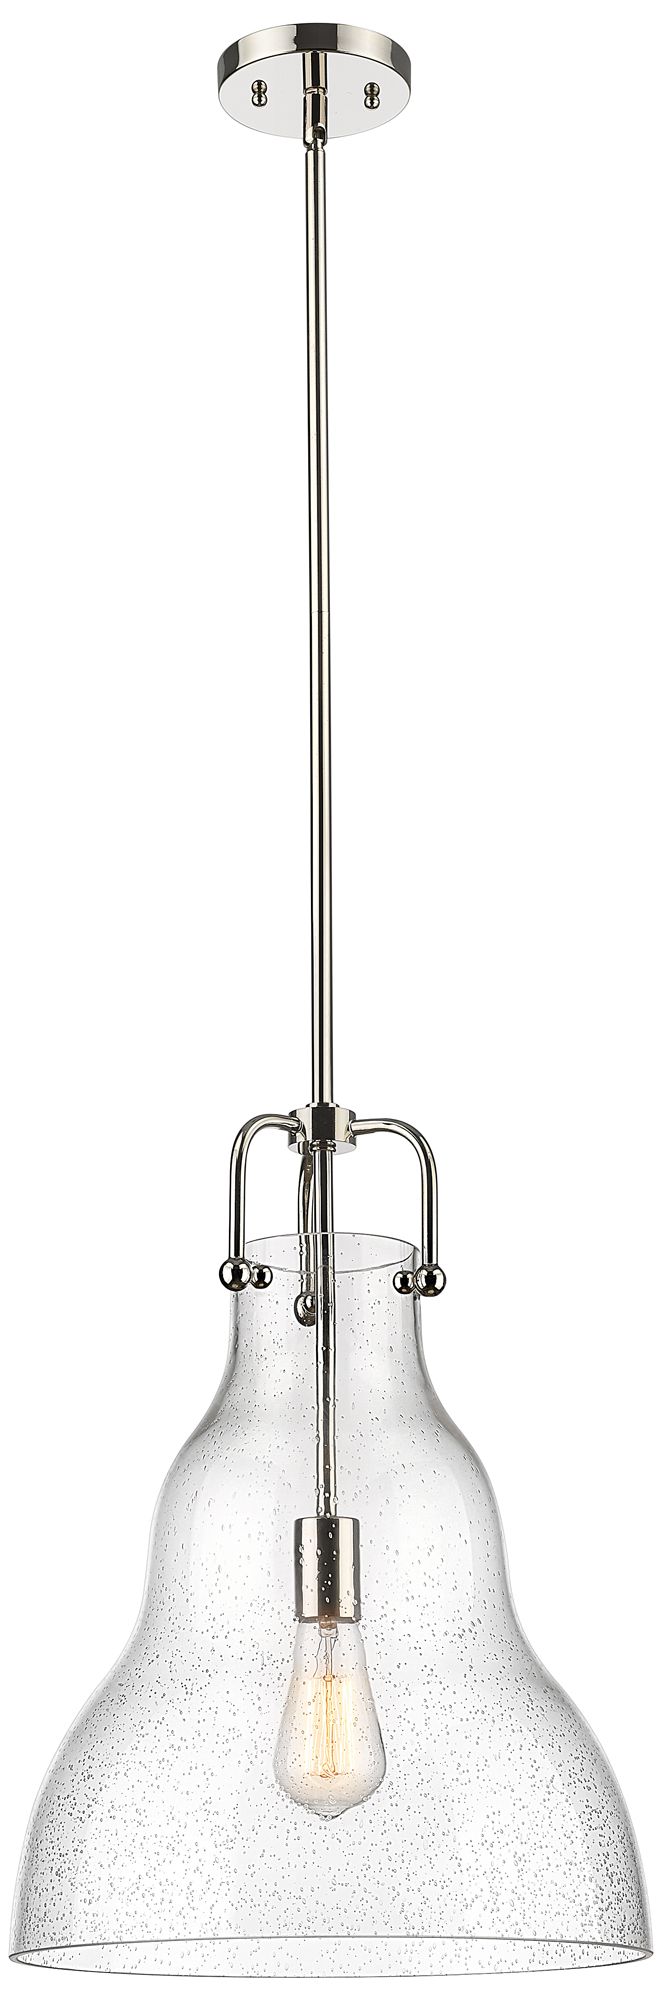 Haverhill 14" Polished Nickel Stem Hung Pendant With Seedy Shade